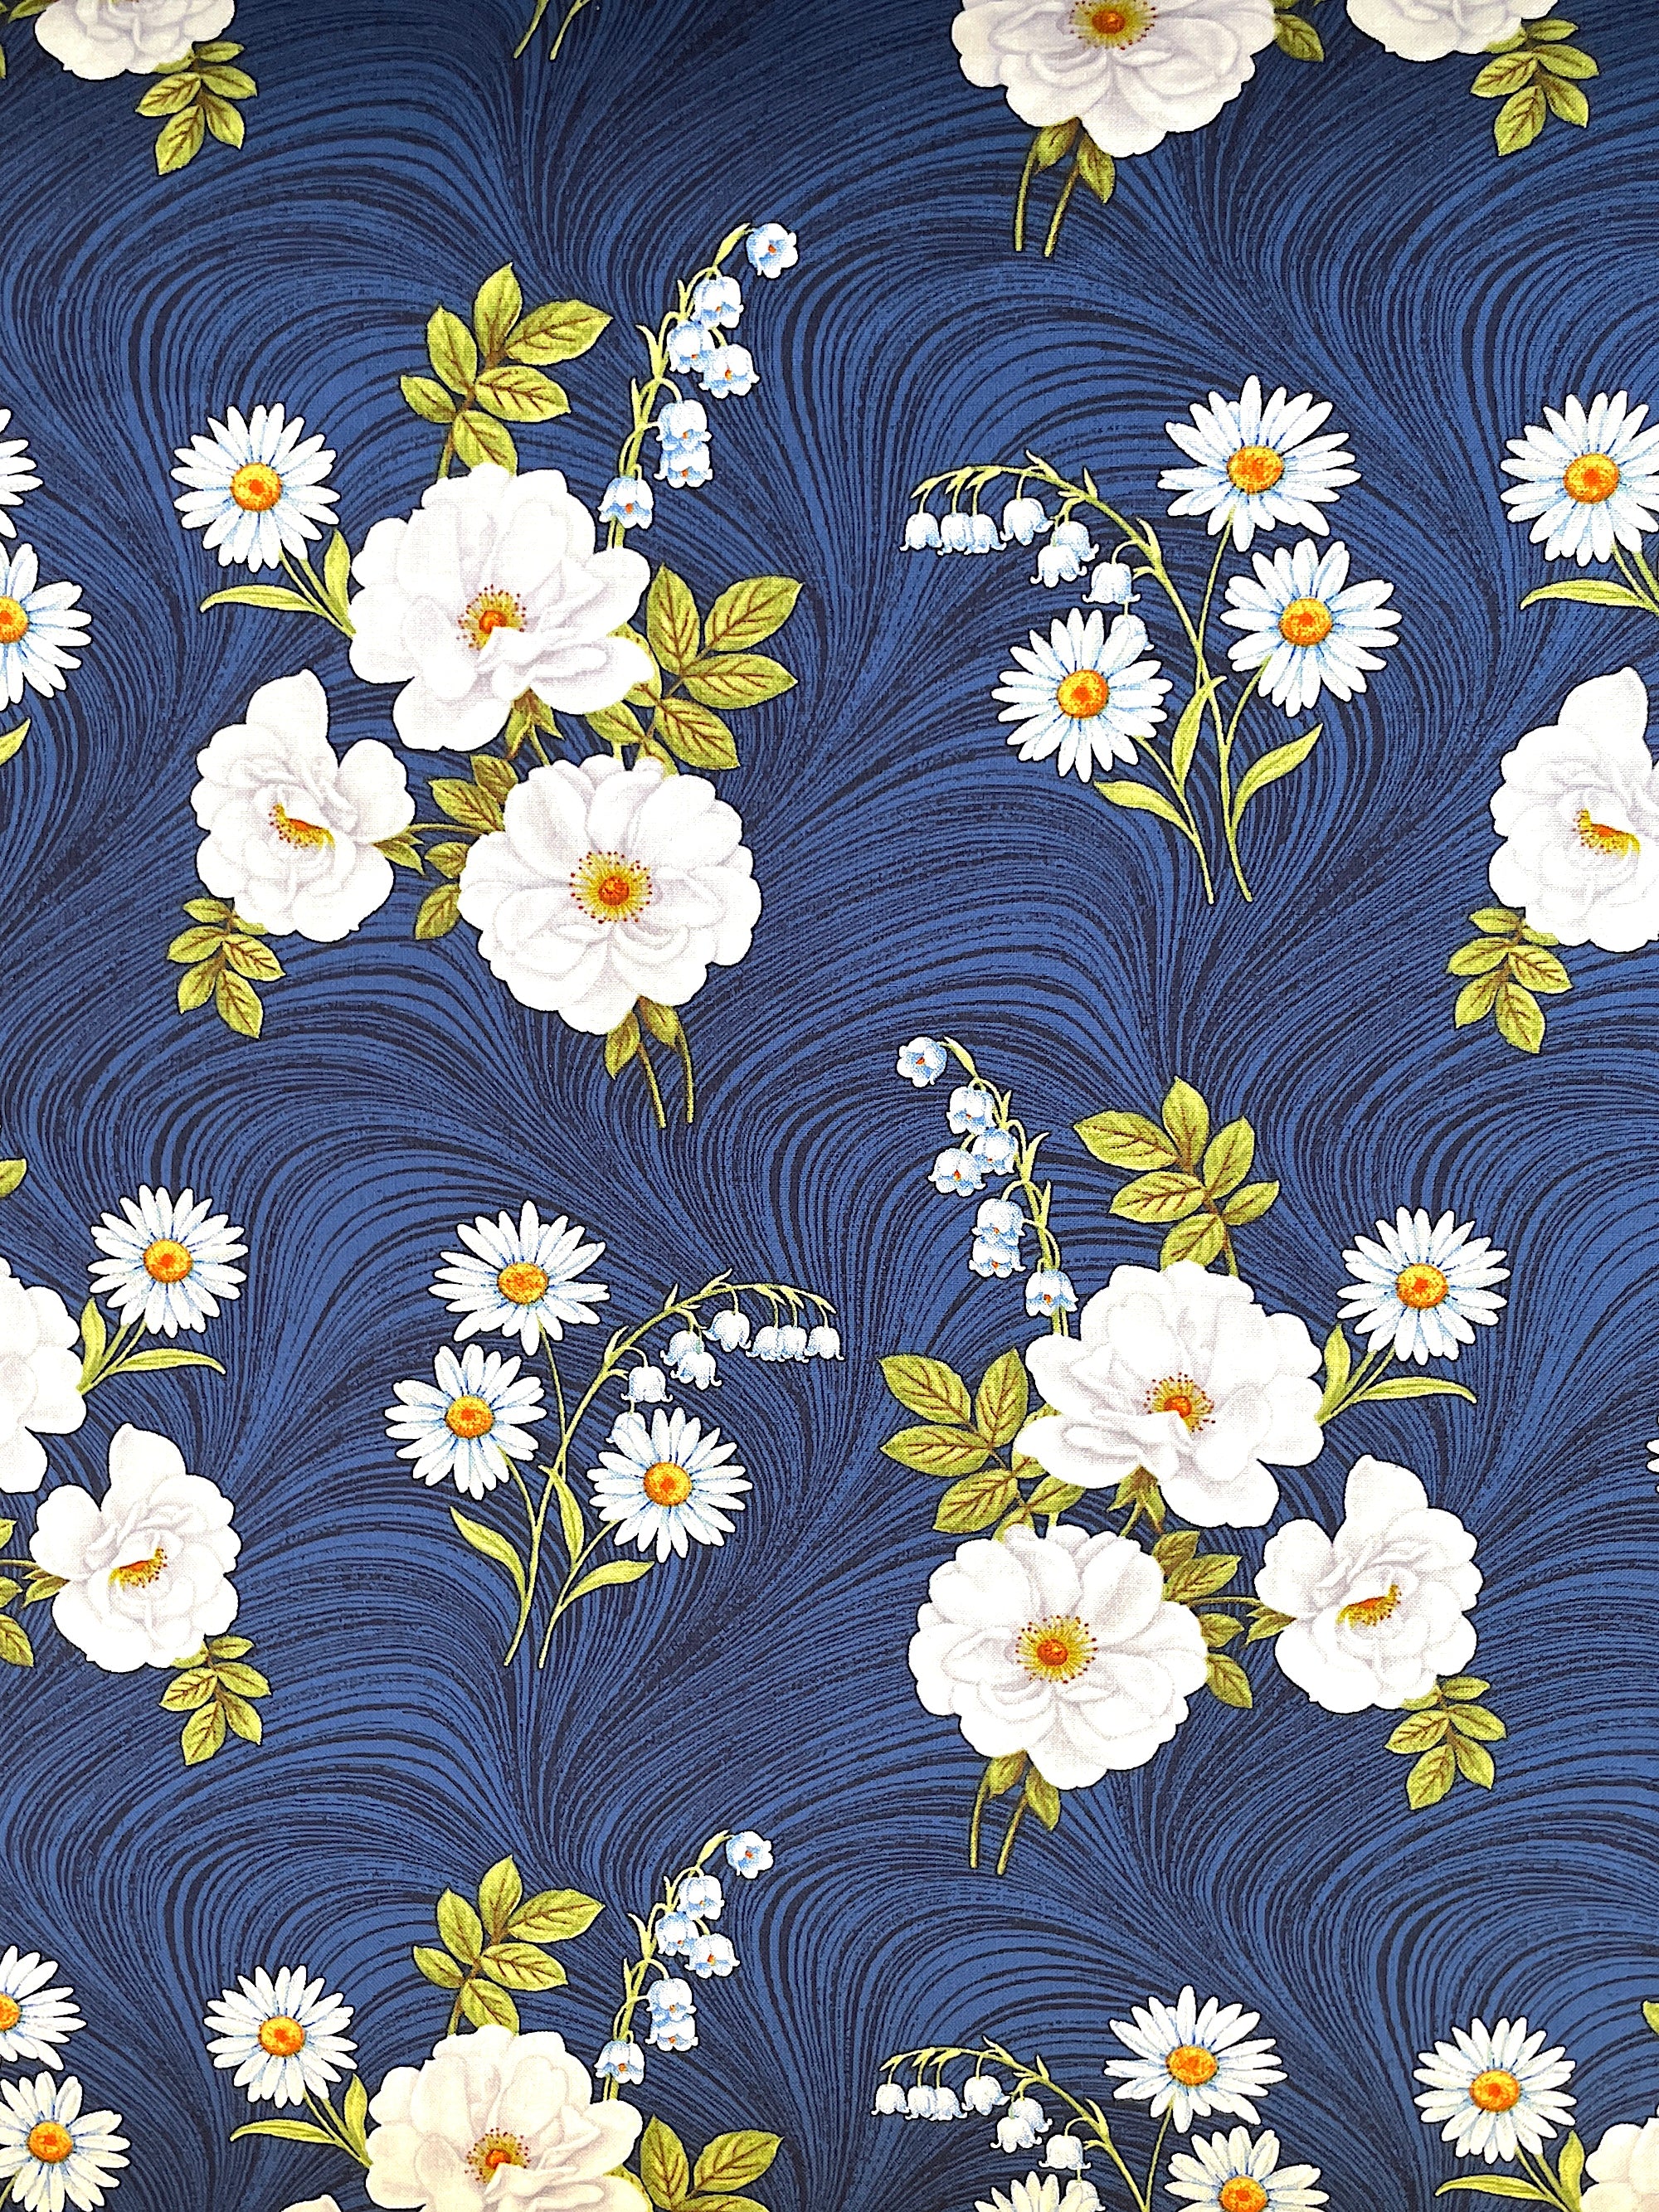 This fabric is from the Blue &amp; White Elegance collection. This dark blue cotton fabric is covered with white flowers and green leaves.